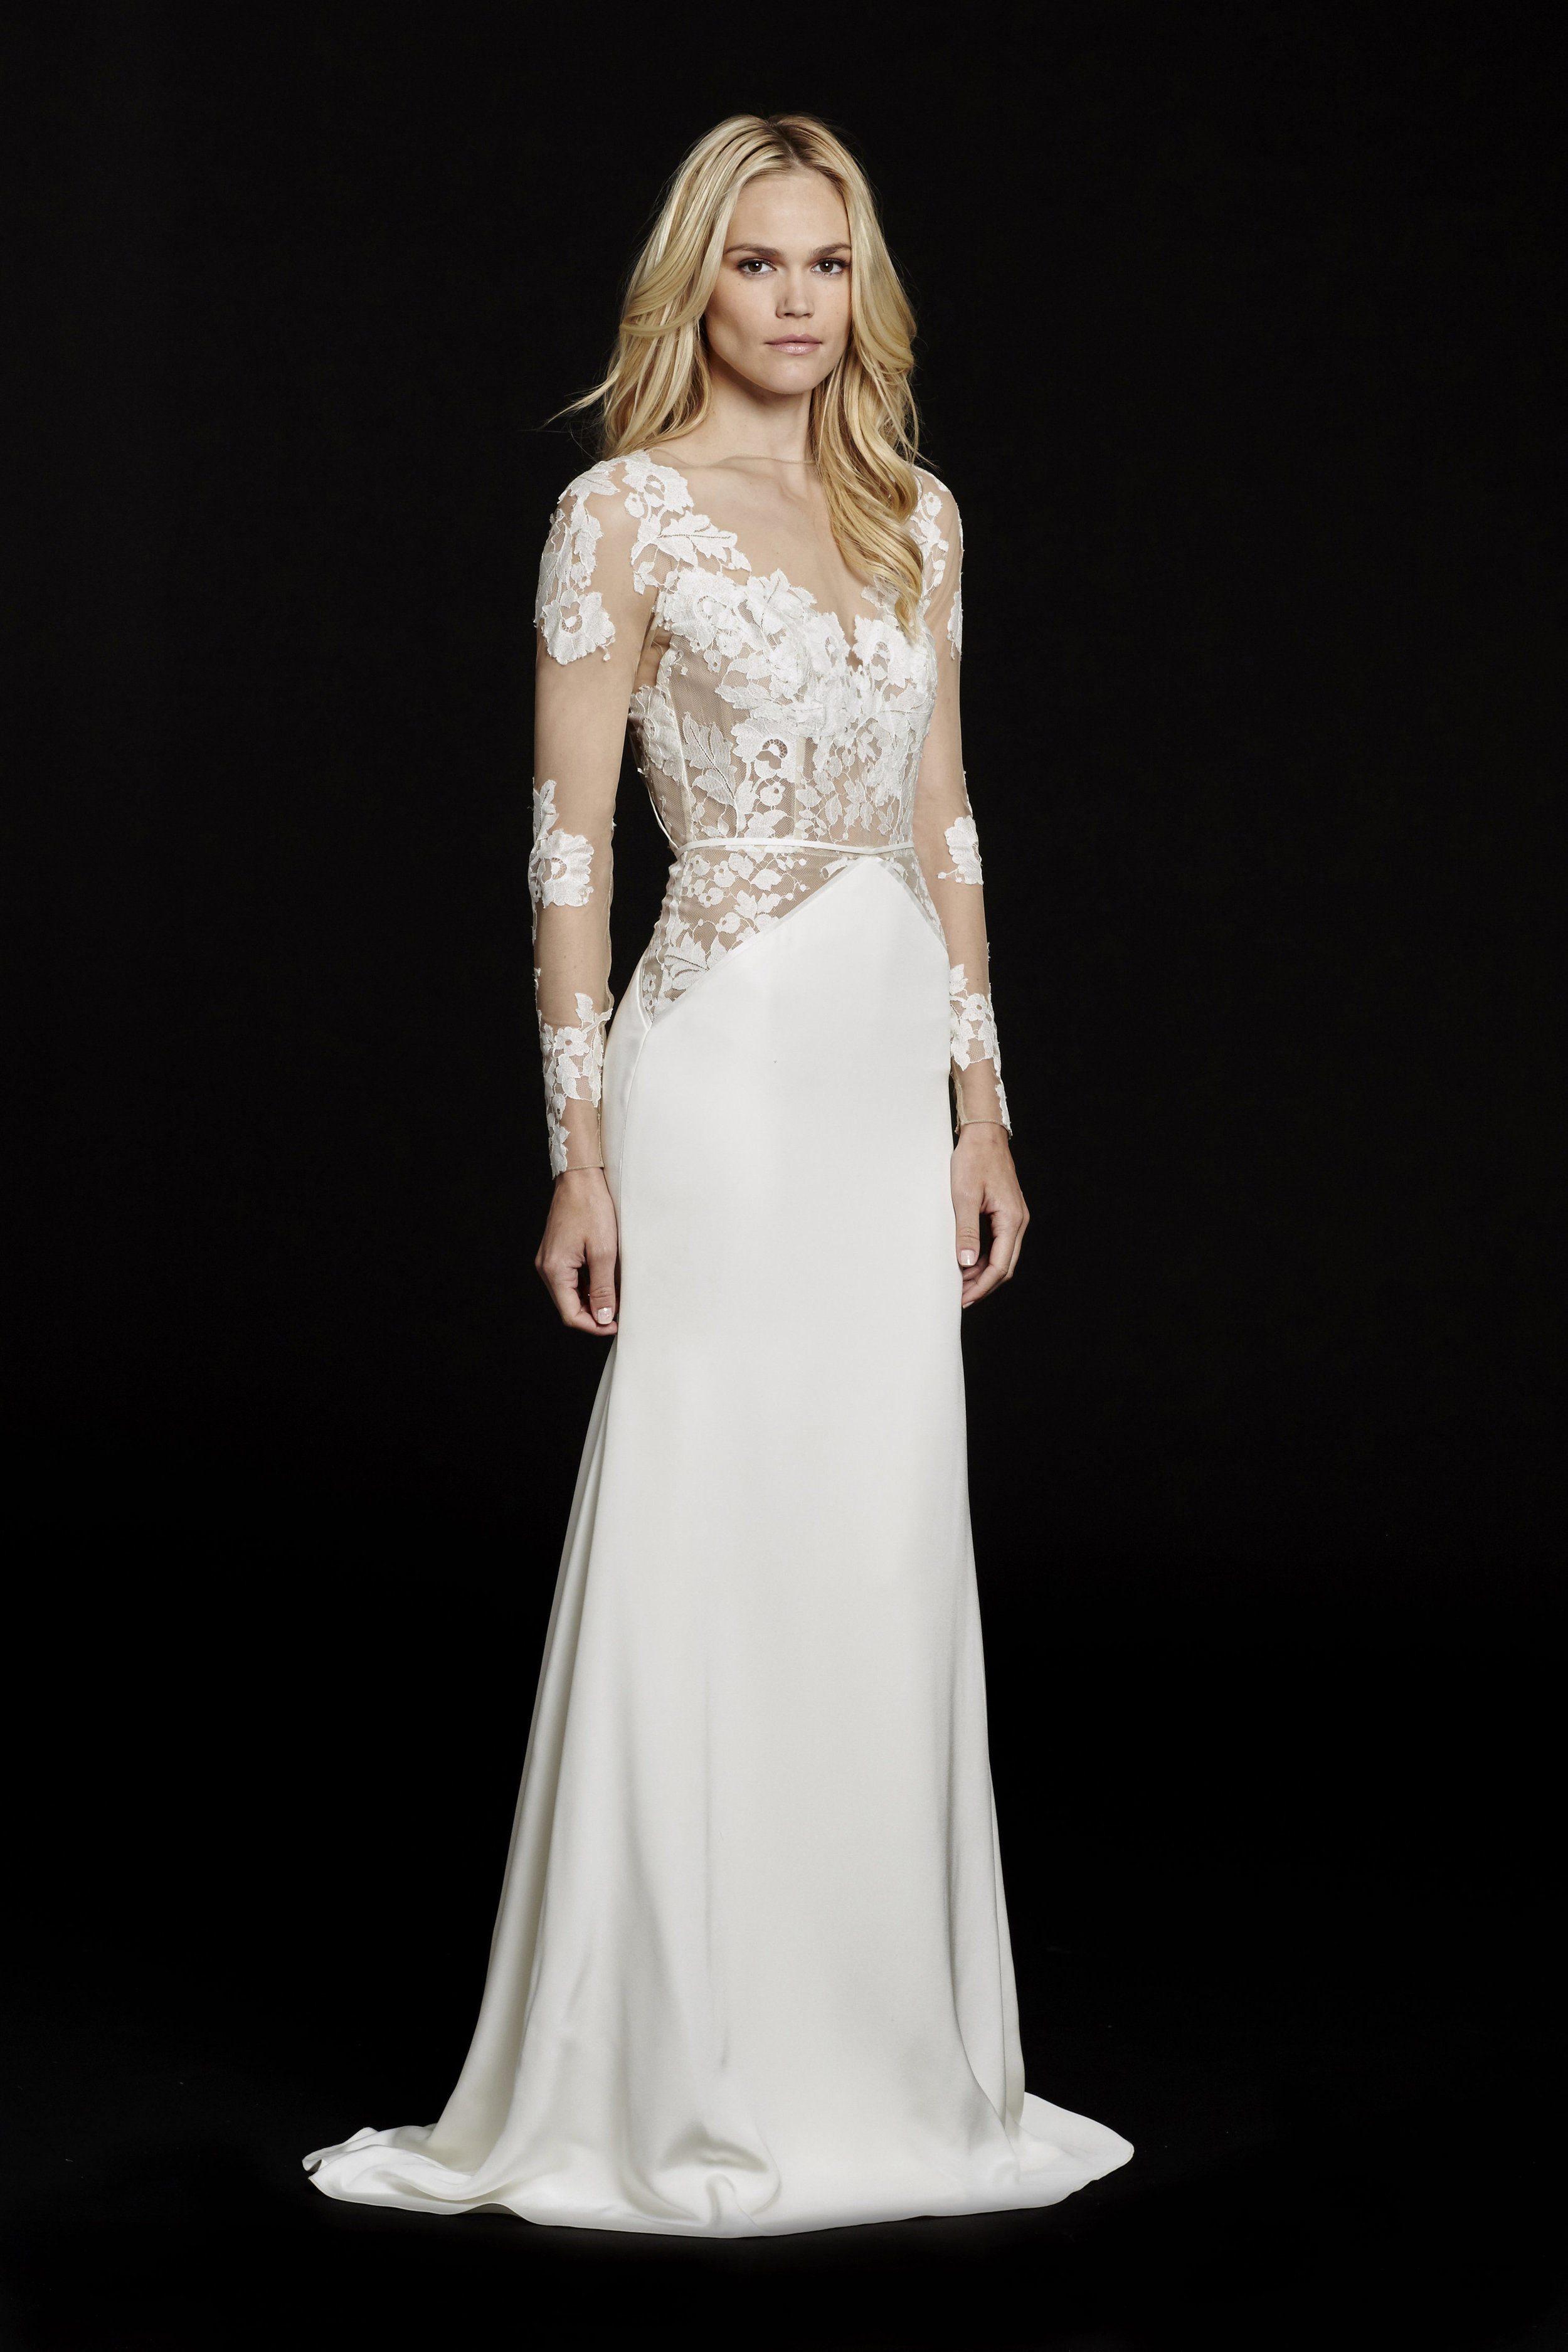 chandon gown hayley paige price